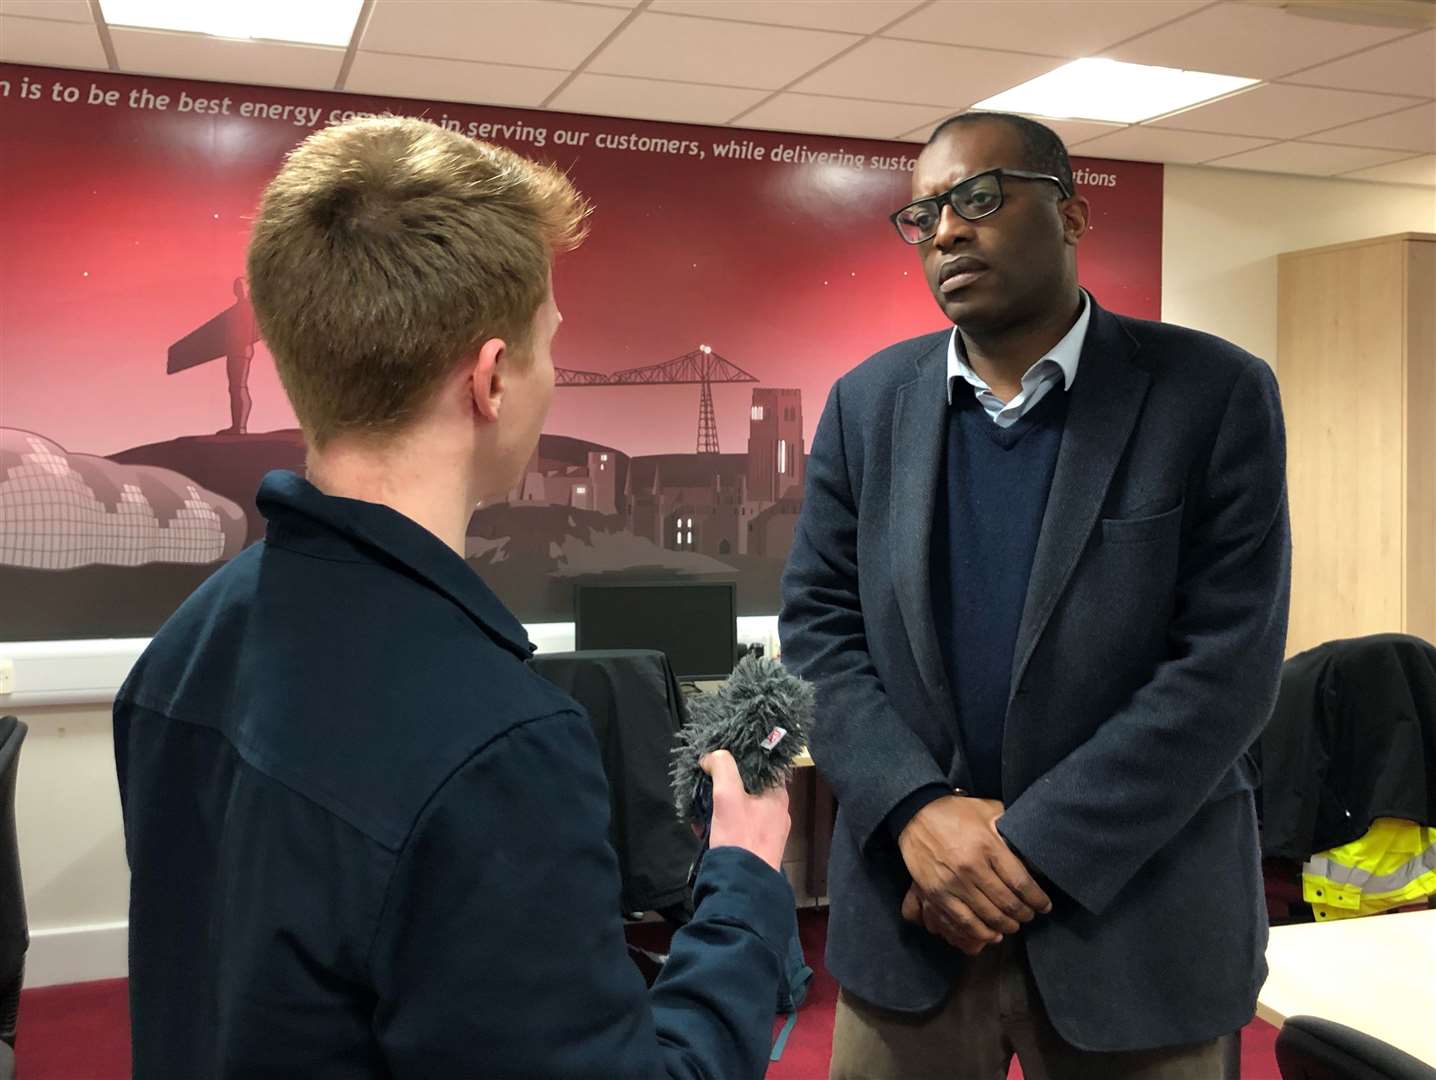 Energy Secretary Kwasi Kwarteng visited a Northern Powergrid call centre in Penshaw, near Sunderland in the aftermath of the storm (Tom Wilkinson/PA)